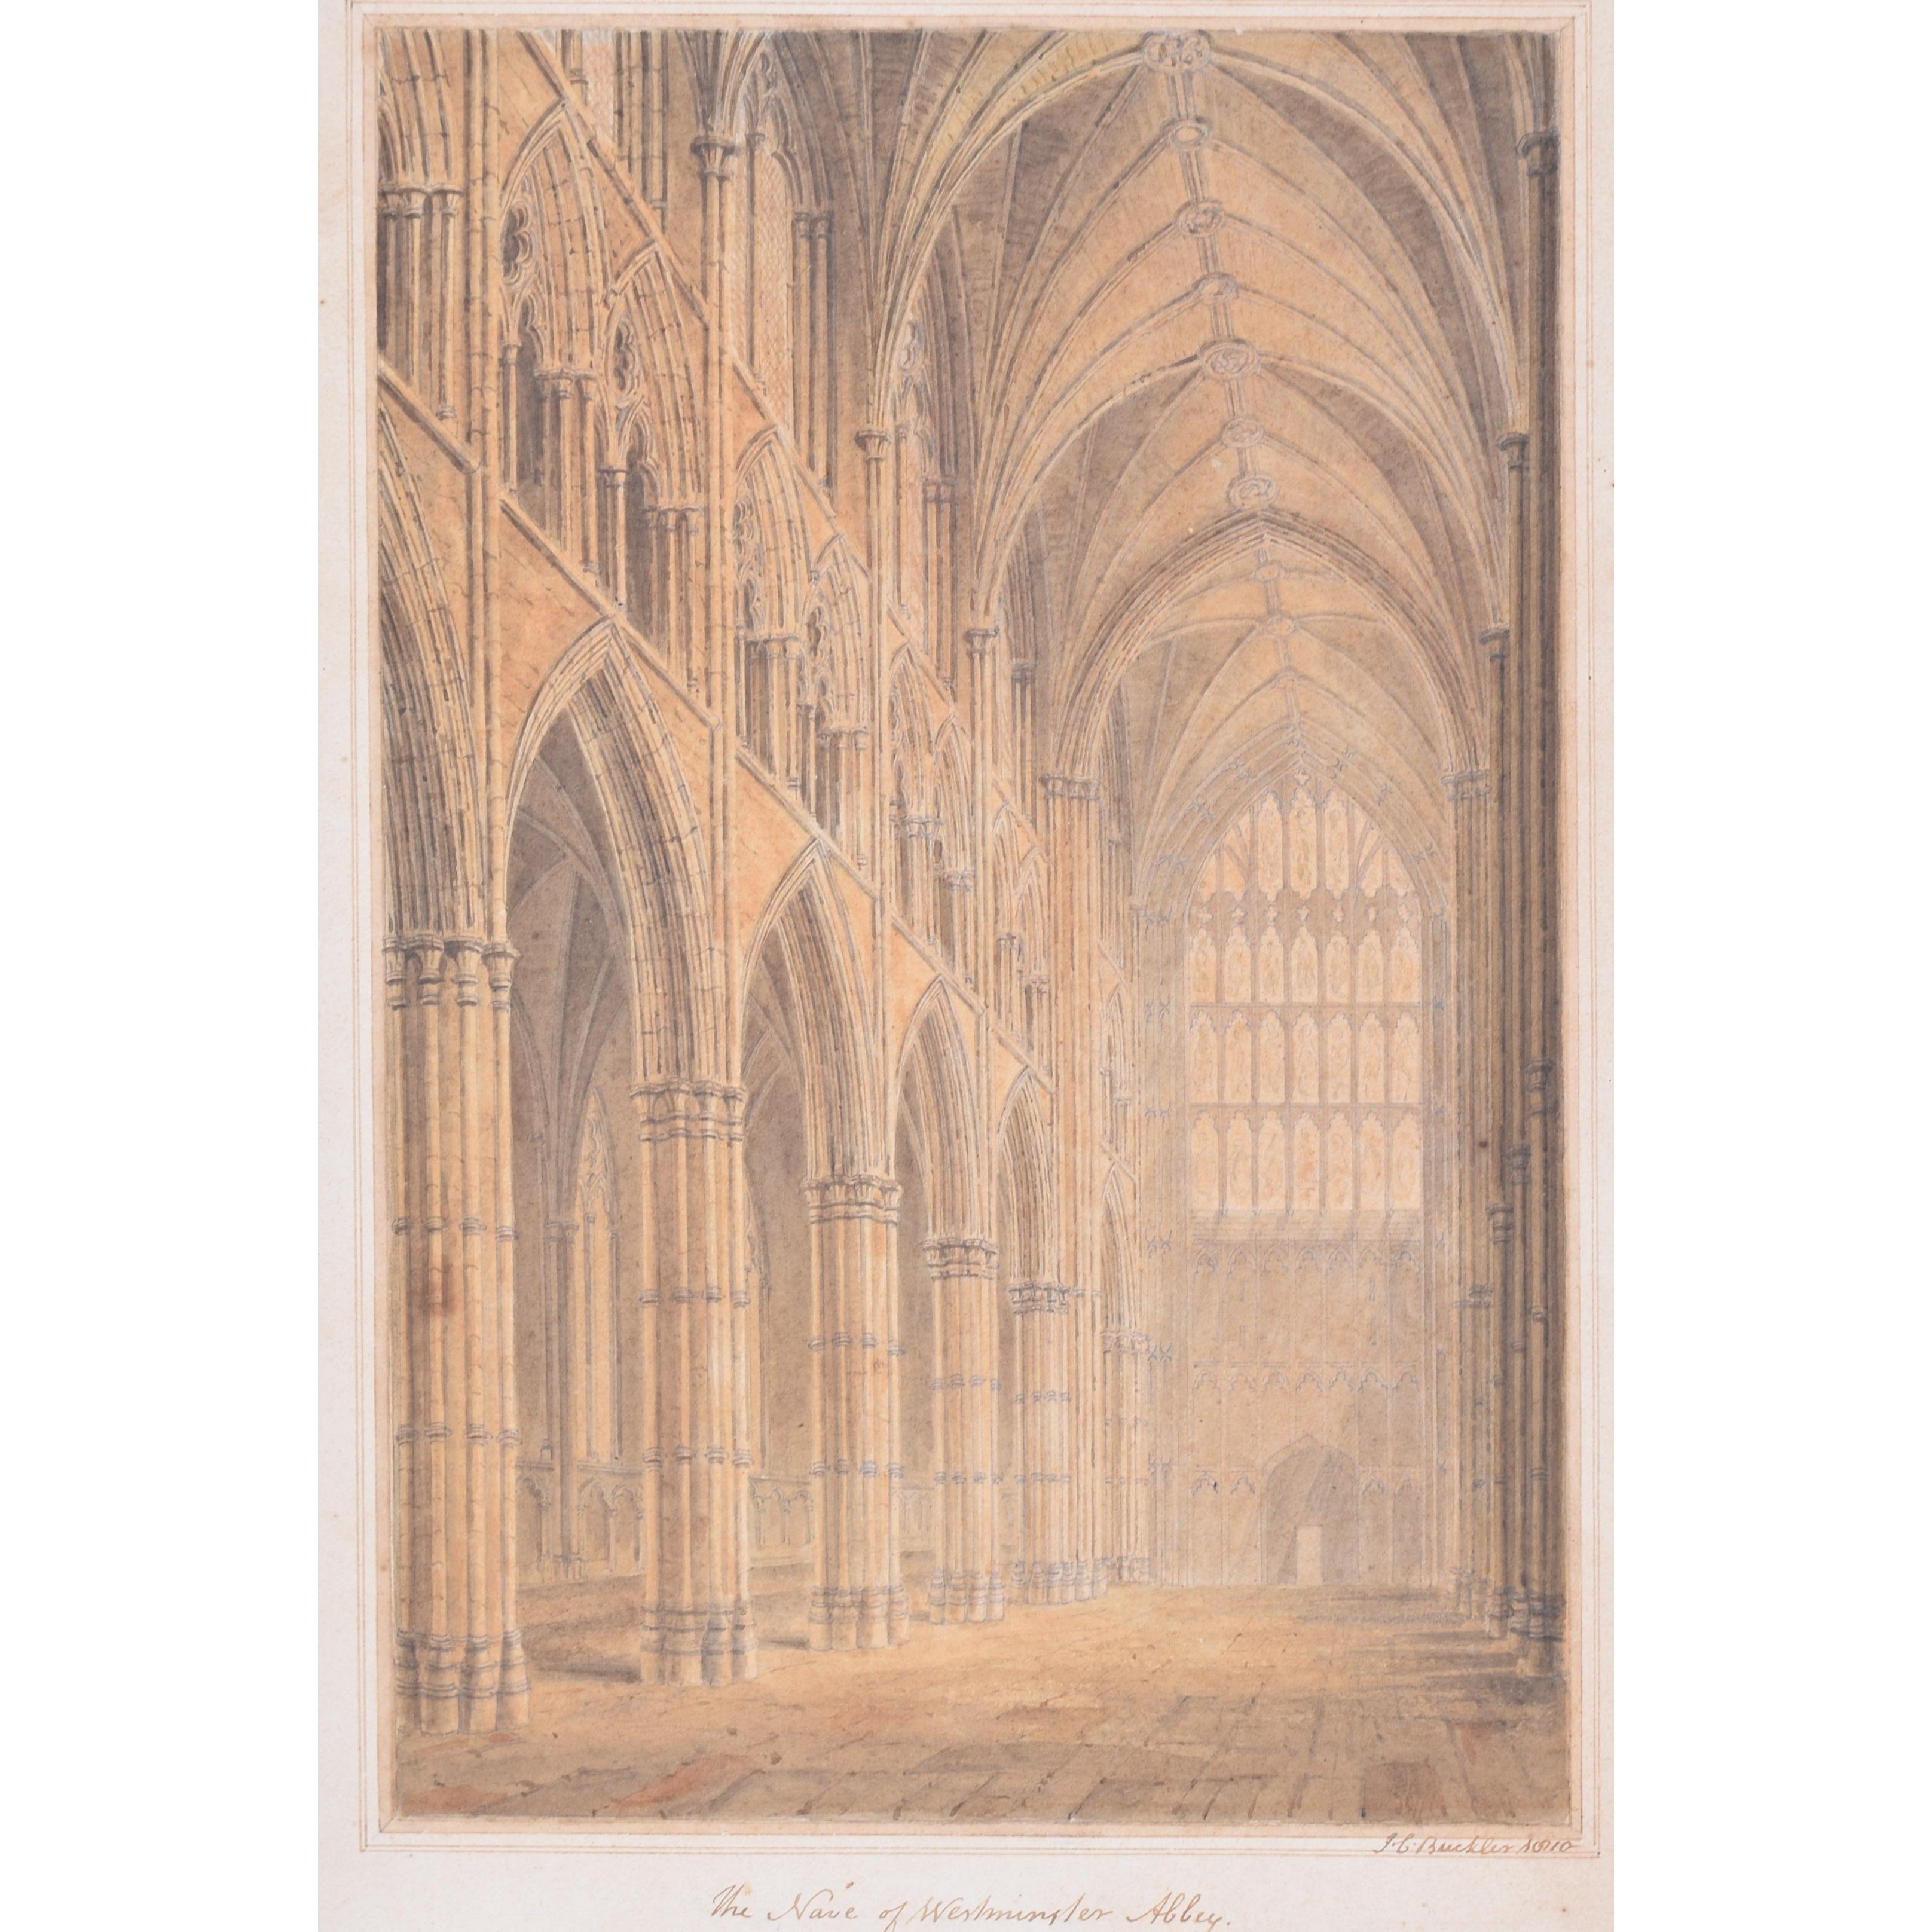 John Chessell Buckler 1810 Westminster Abbey Nave watercolour London Britain